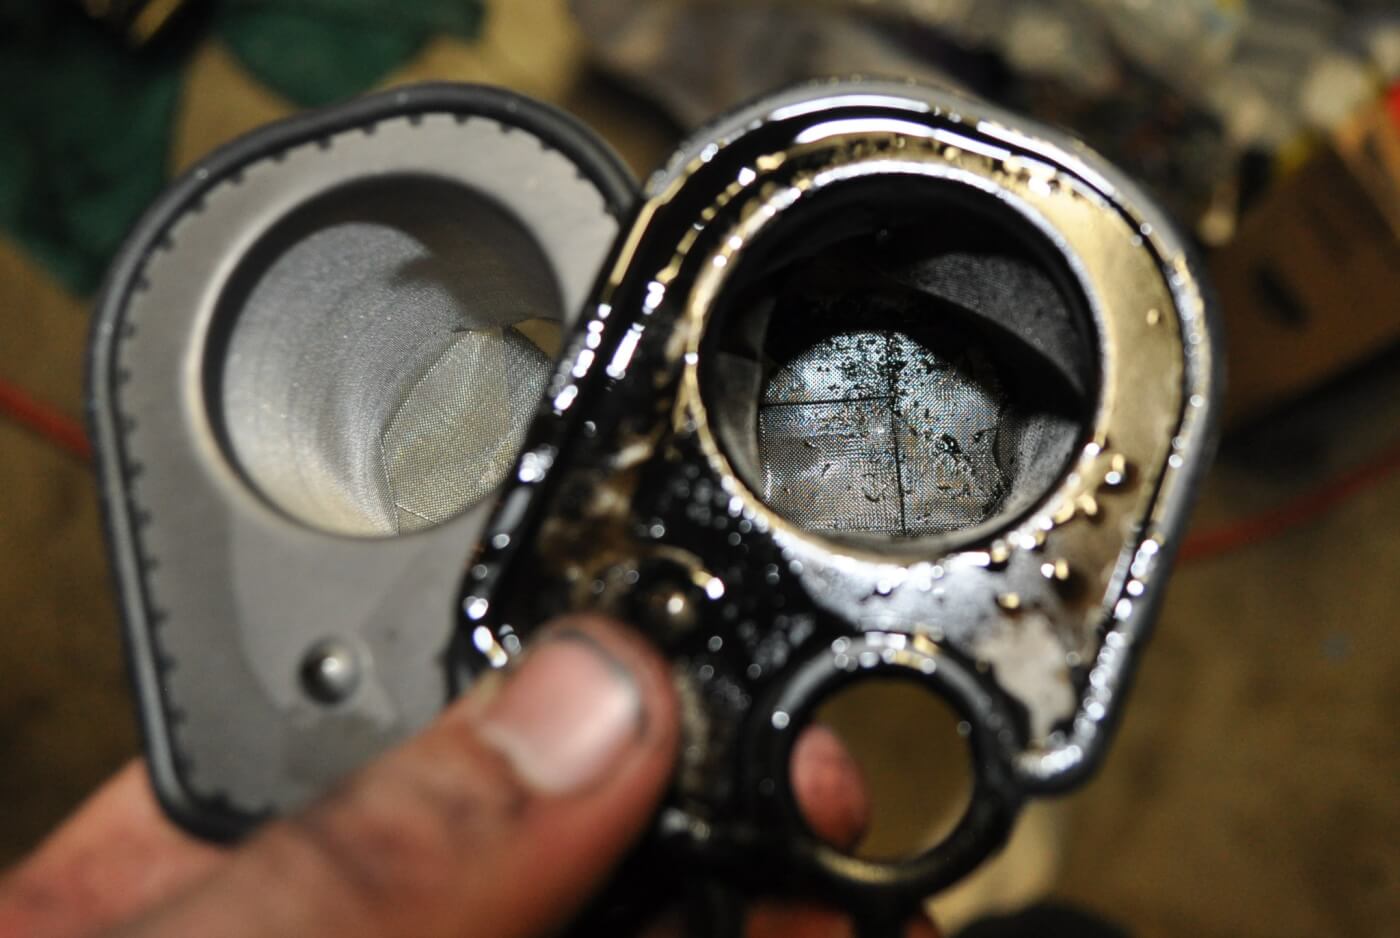 9/10. This is the HPOP oil reservoir (left). Between it and the front cover is a screen filter (right) which stops any large contaminants from entering the HPOP, and later the injectors. DieselSite includes a new filter with the Adrenaline, so of course, we replaced ours.